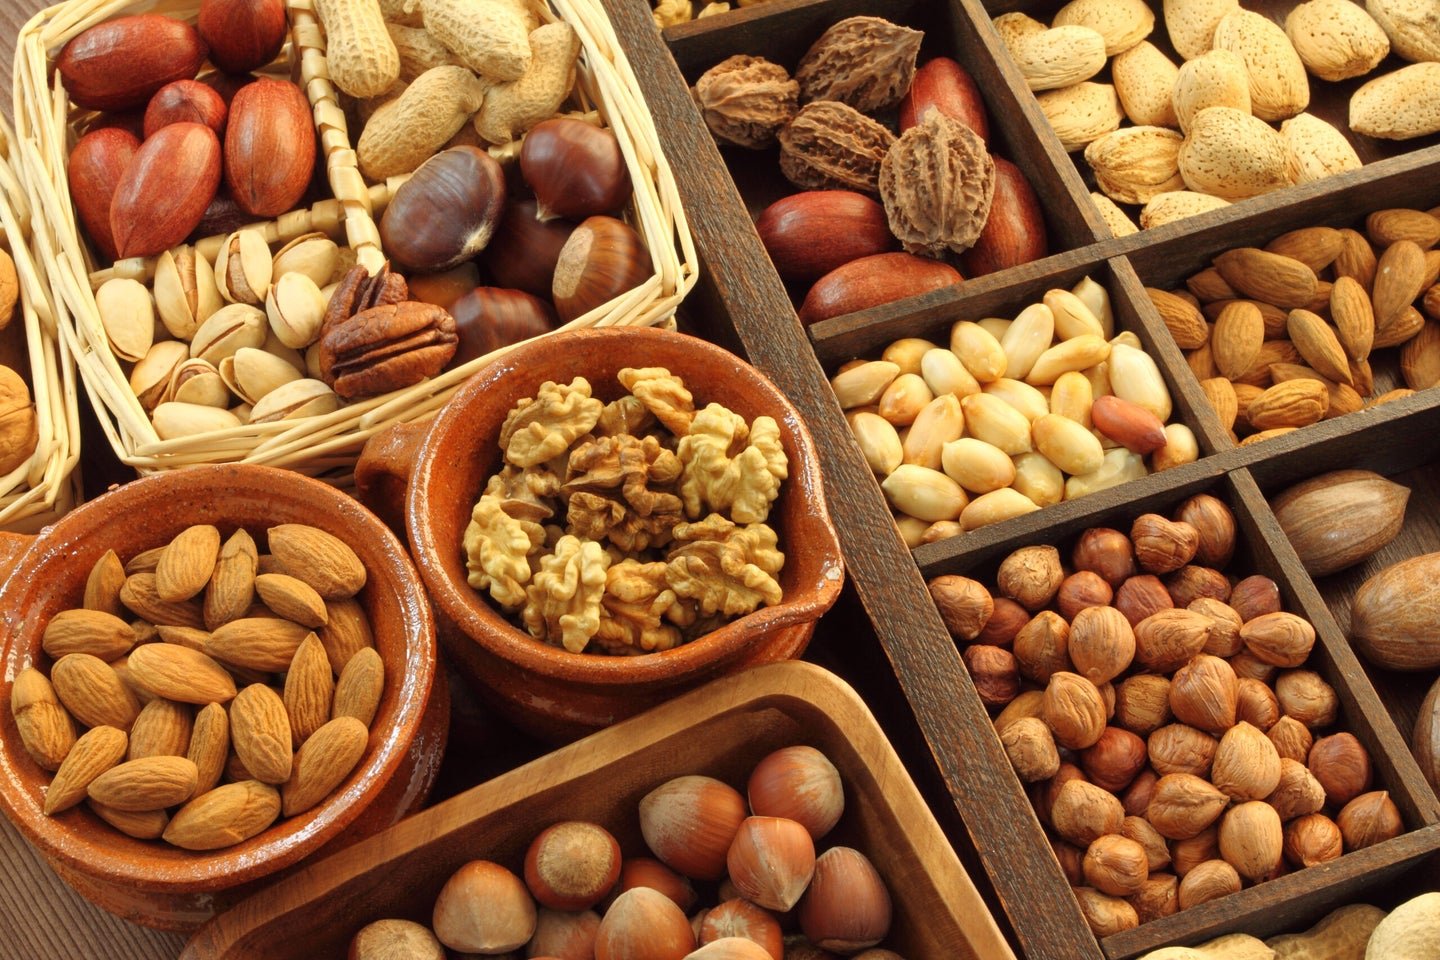 Nuts are full of fat and calories—and you should probably eat more of them